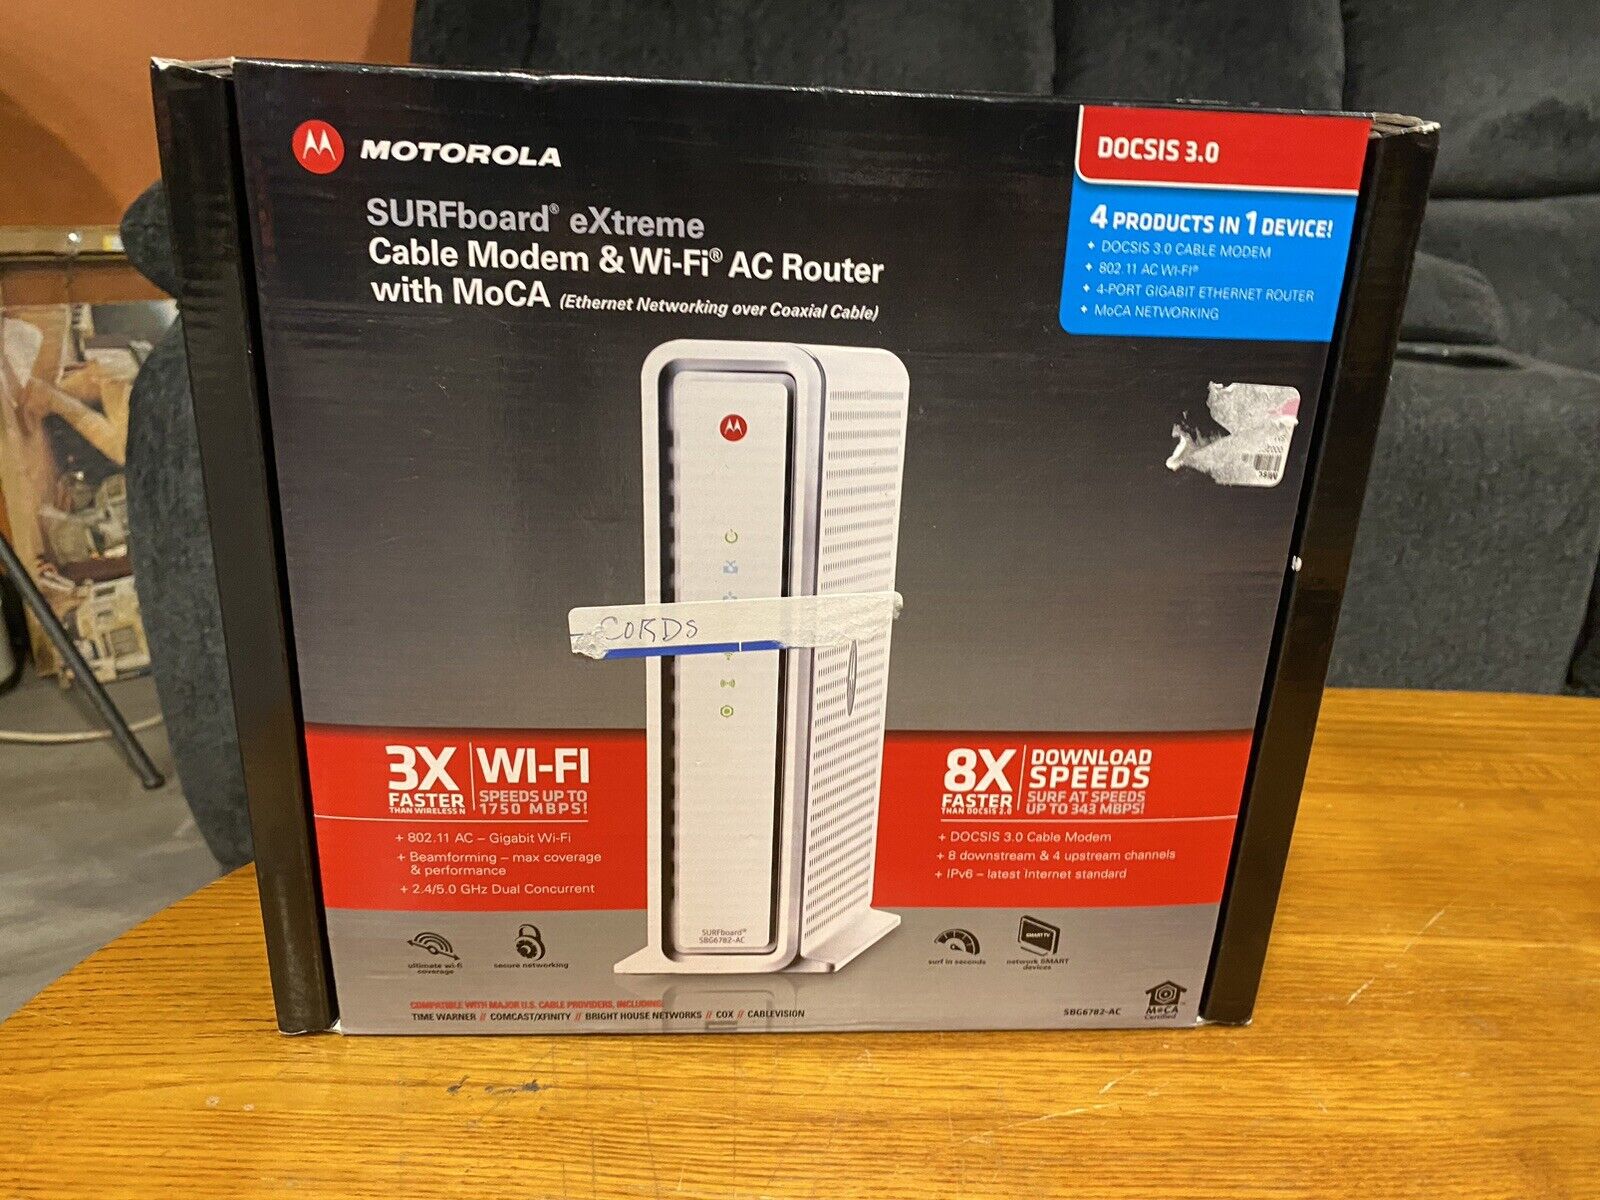 Motorola SURFboard SBG6782-ACH Cable Modem Wi-Fi AC Router 4 ports Docsis 3.0